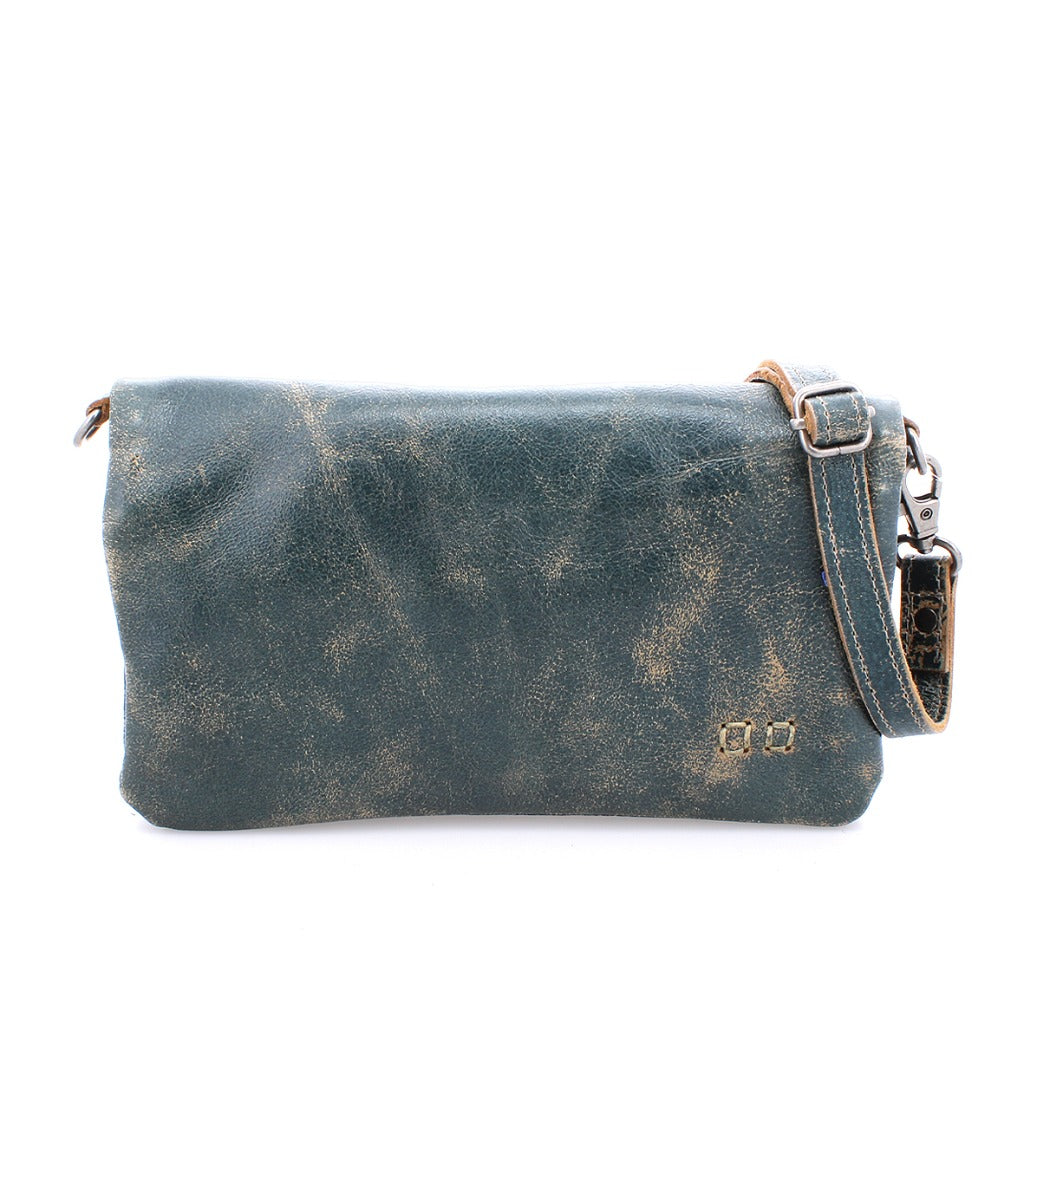 A Bed Stu Cadence teal leather cross body bag with a strap.